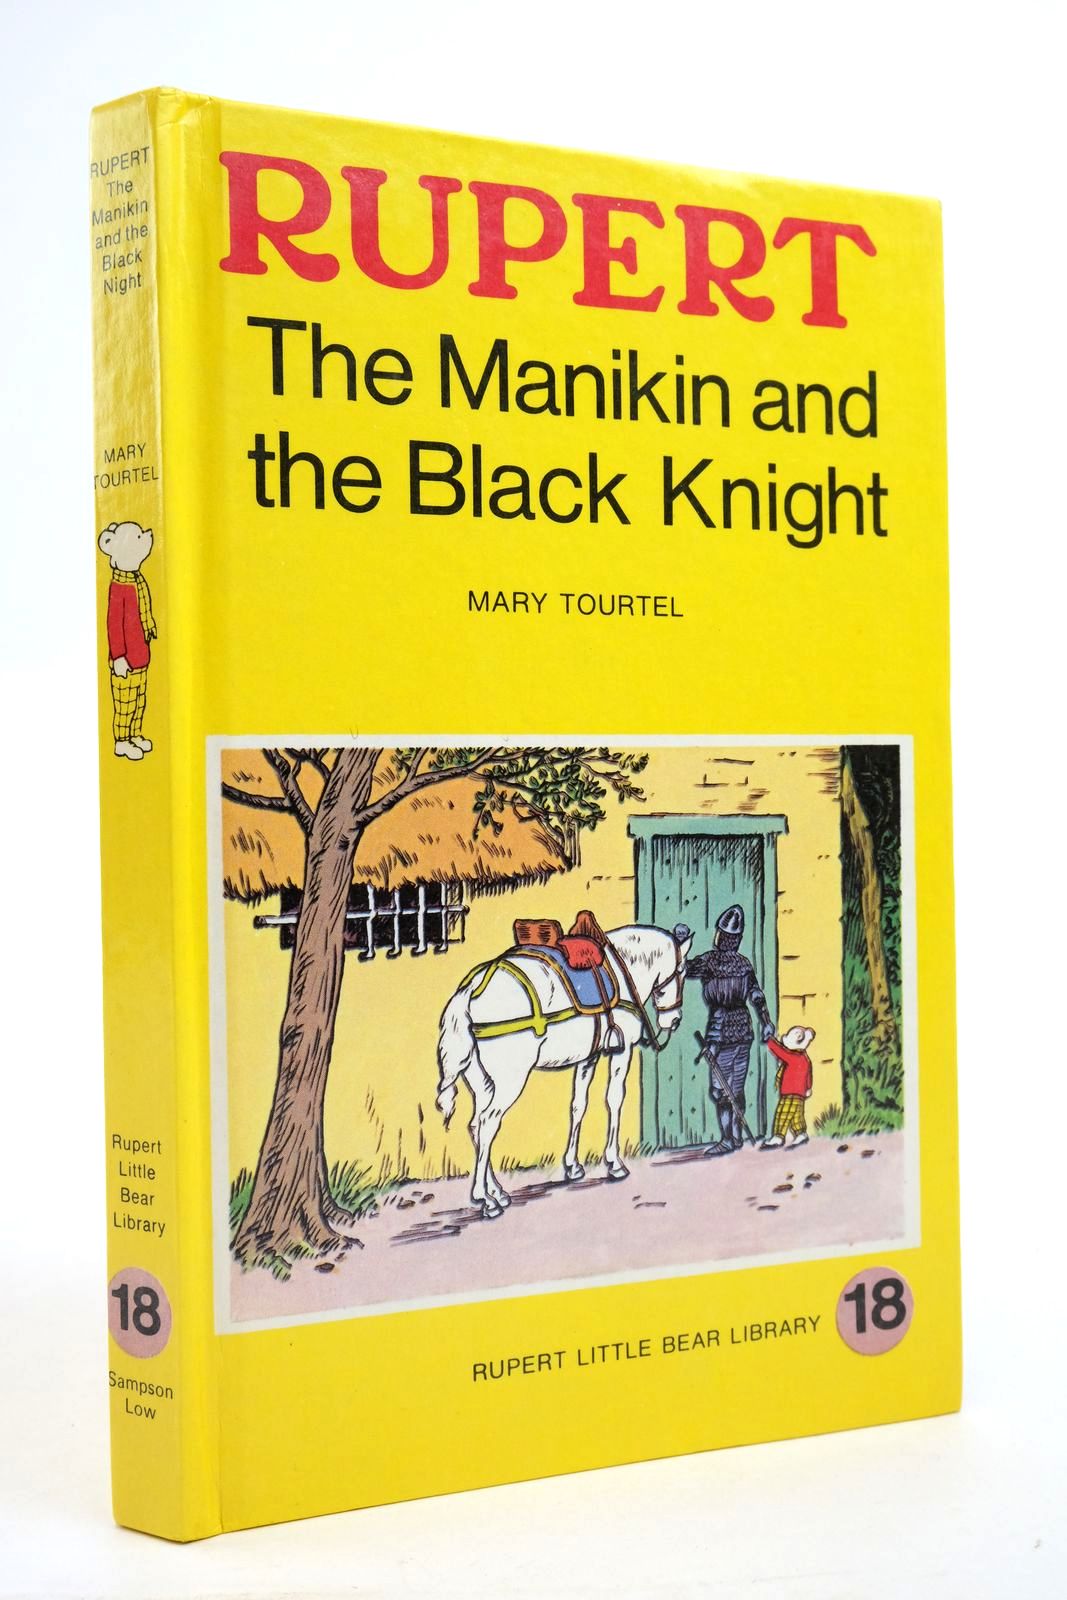 Photo of RUPERT, THE MANIKIN AND THE BLACK KNIGHT - RUPERT LITTLE BEAR LIBRARY No. 18 (WOOLWORTH)- Stock Number: 2136963